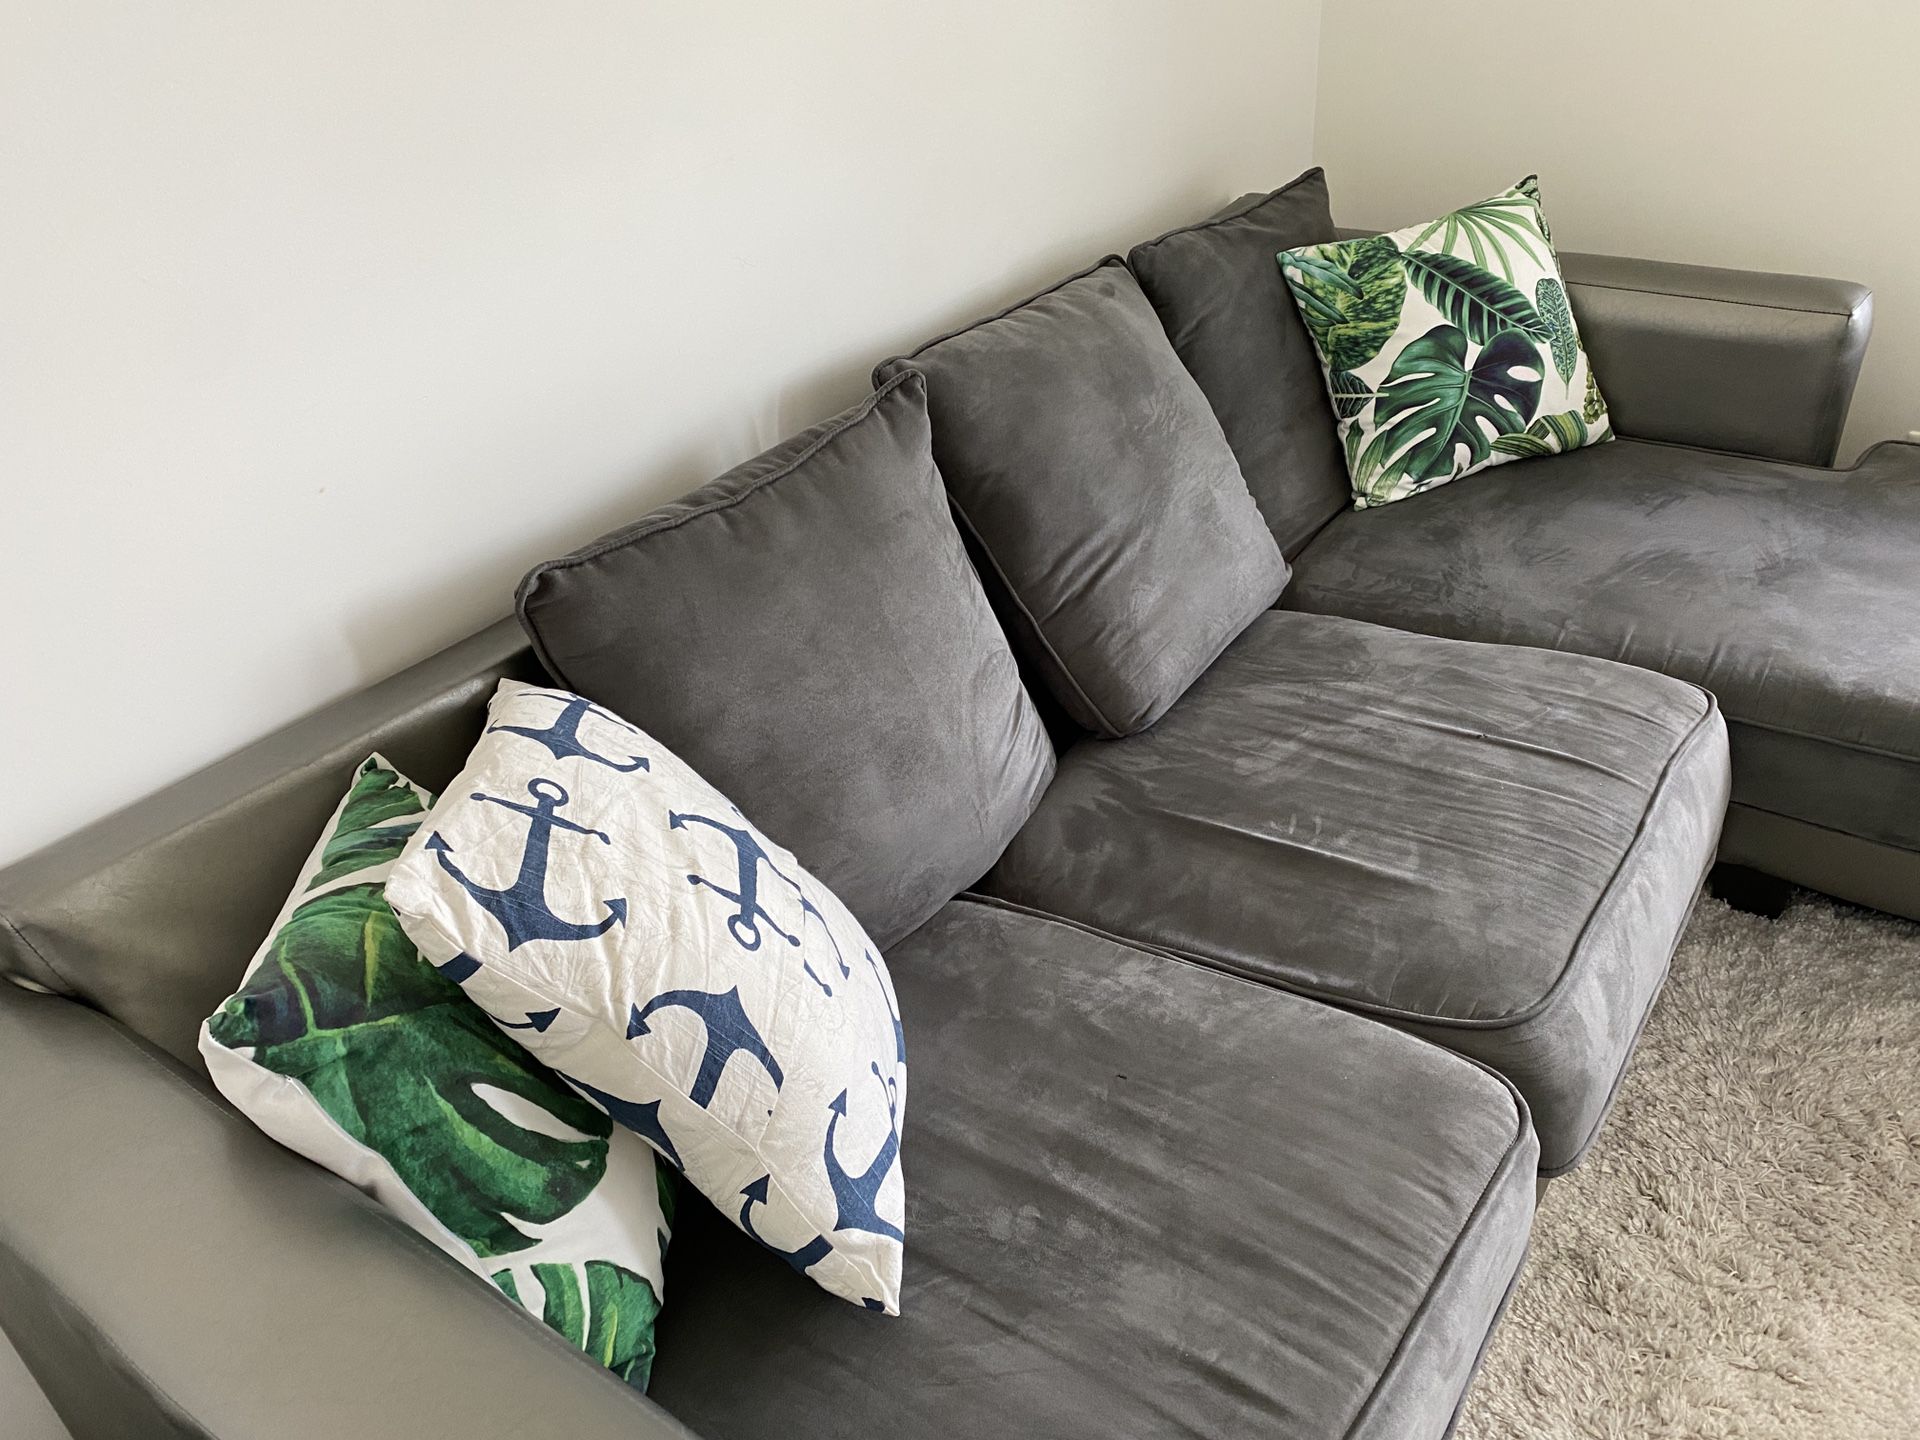 Couch For Sale (Green leaf pillows and puppy not included!)